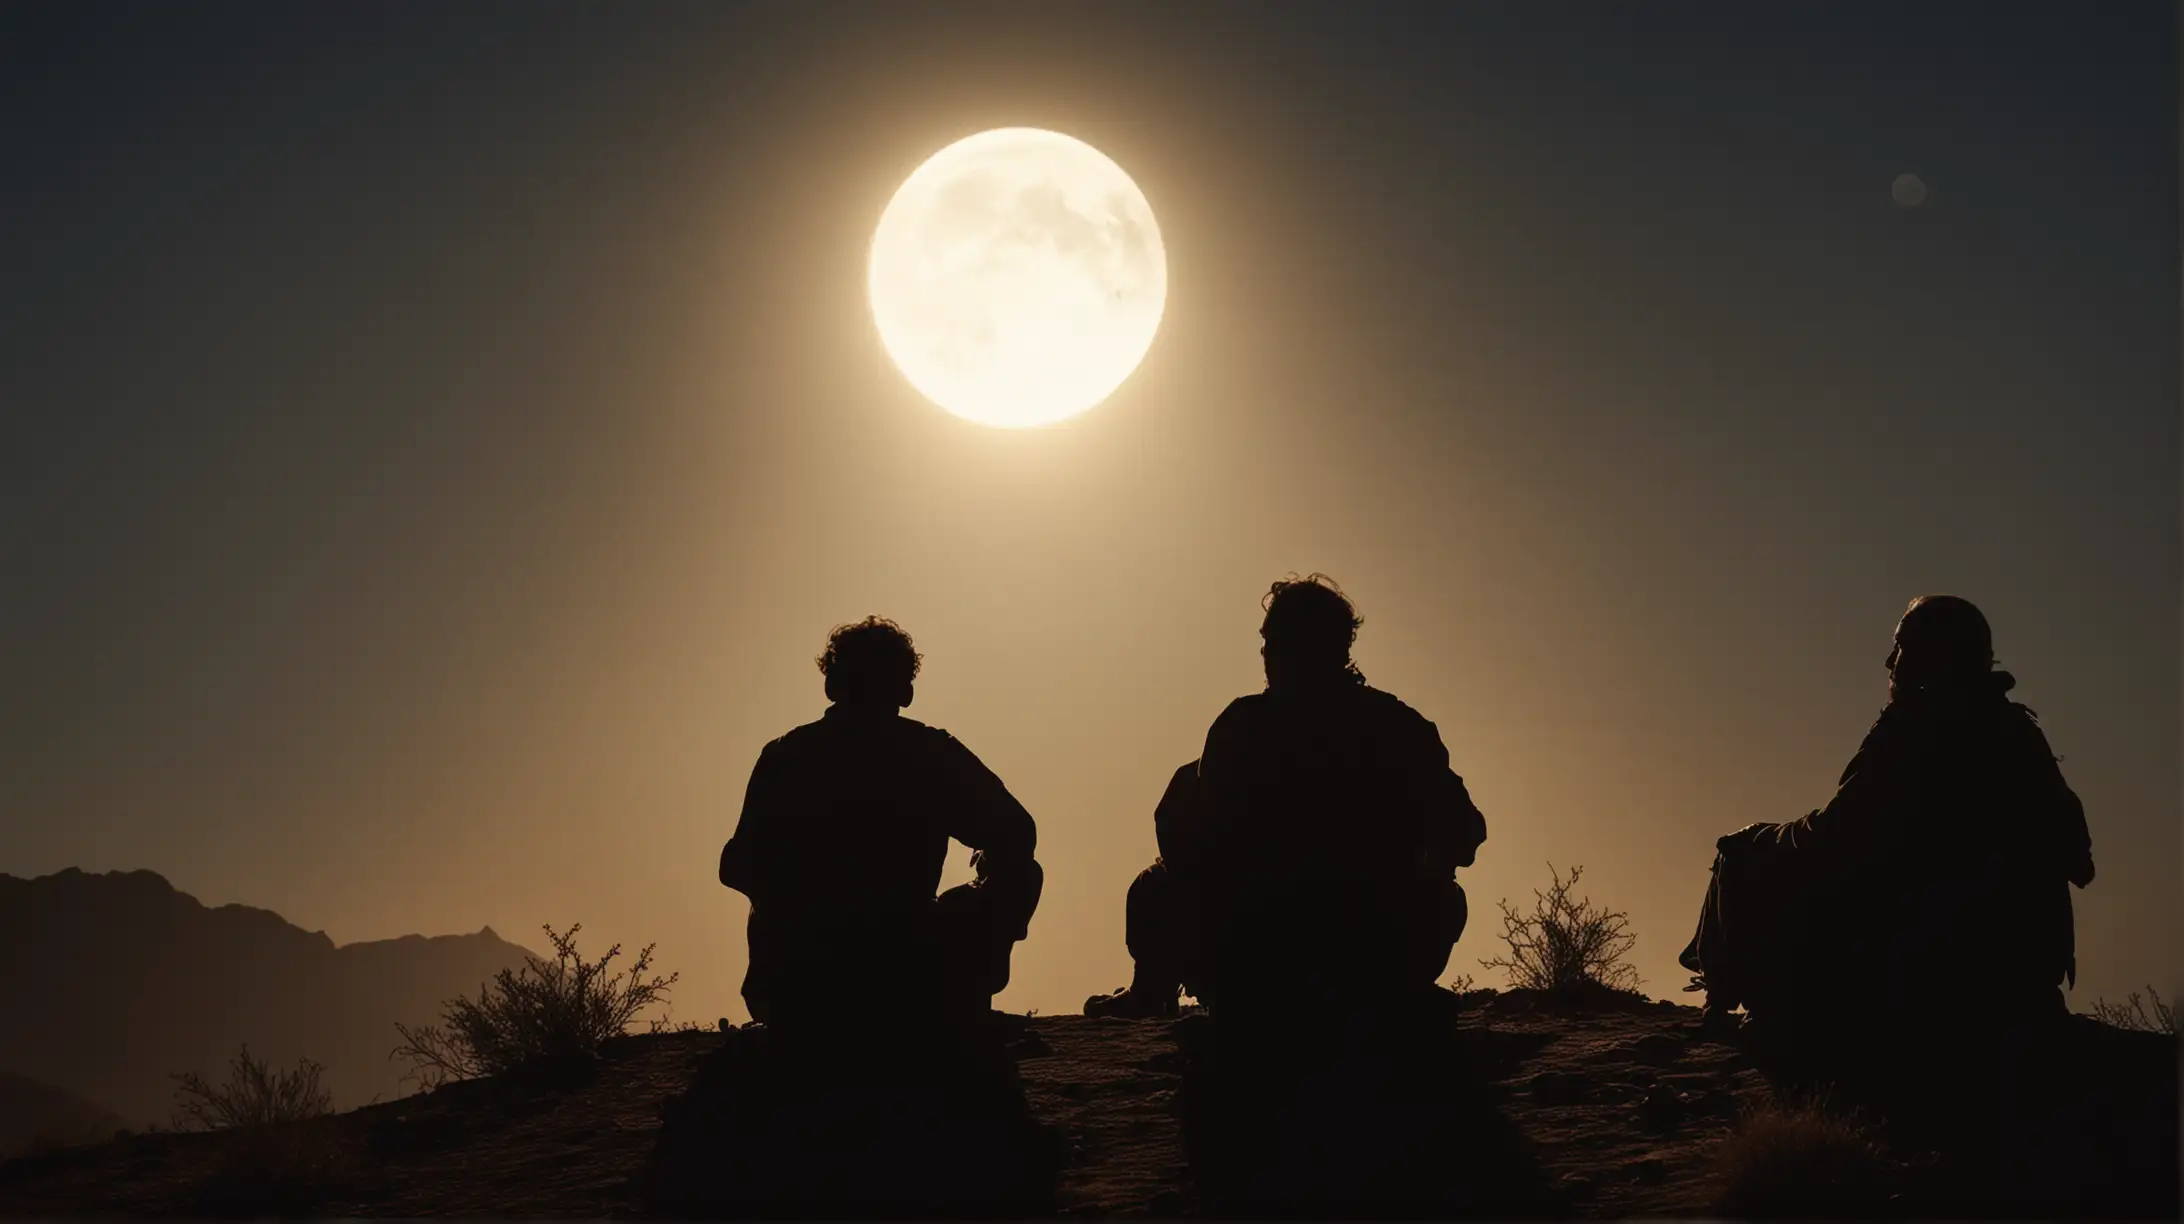 3 middle aged men, sitting on a desert hillside in silhouette. With a big moon  behind them. Set during the biblical era.